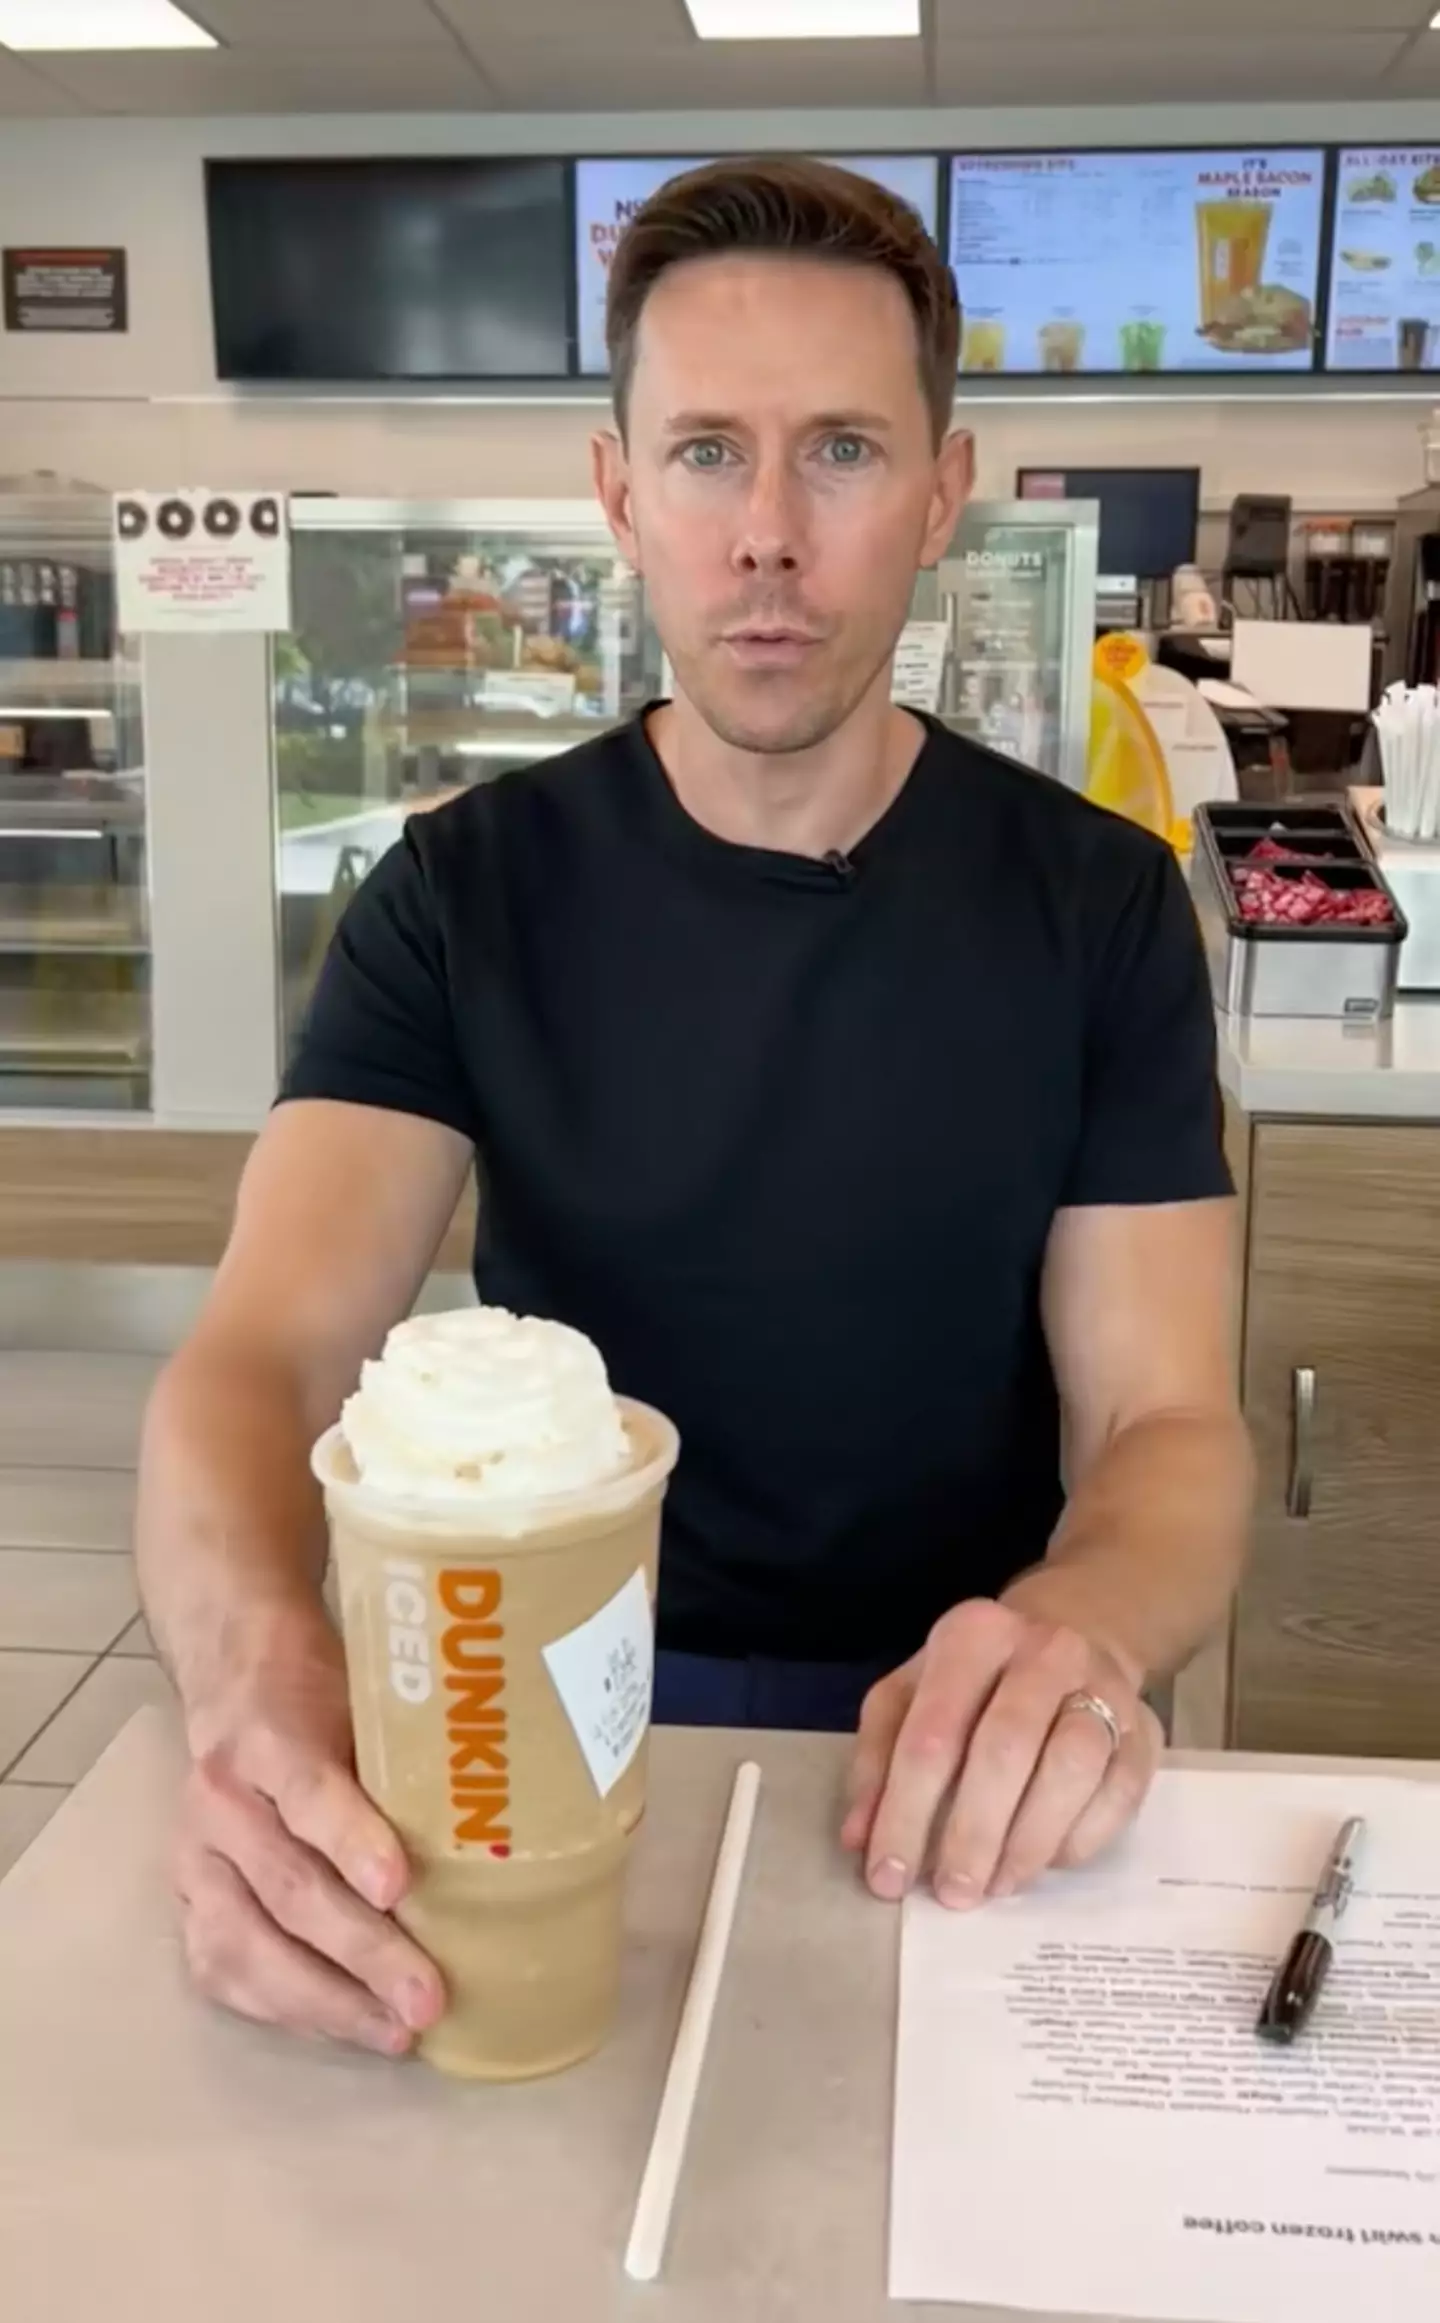 A TikToker revealed the apparent sugar content in a new Dunkin' Donuts drink.